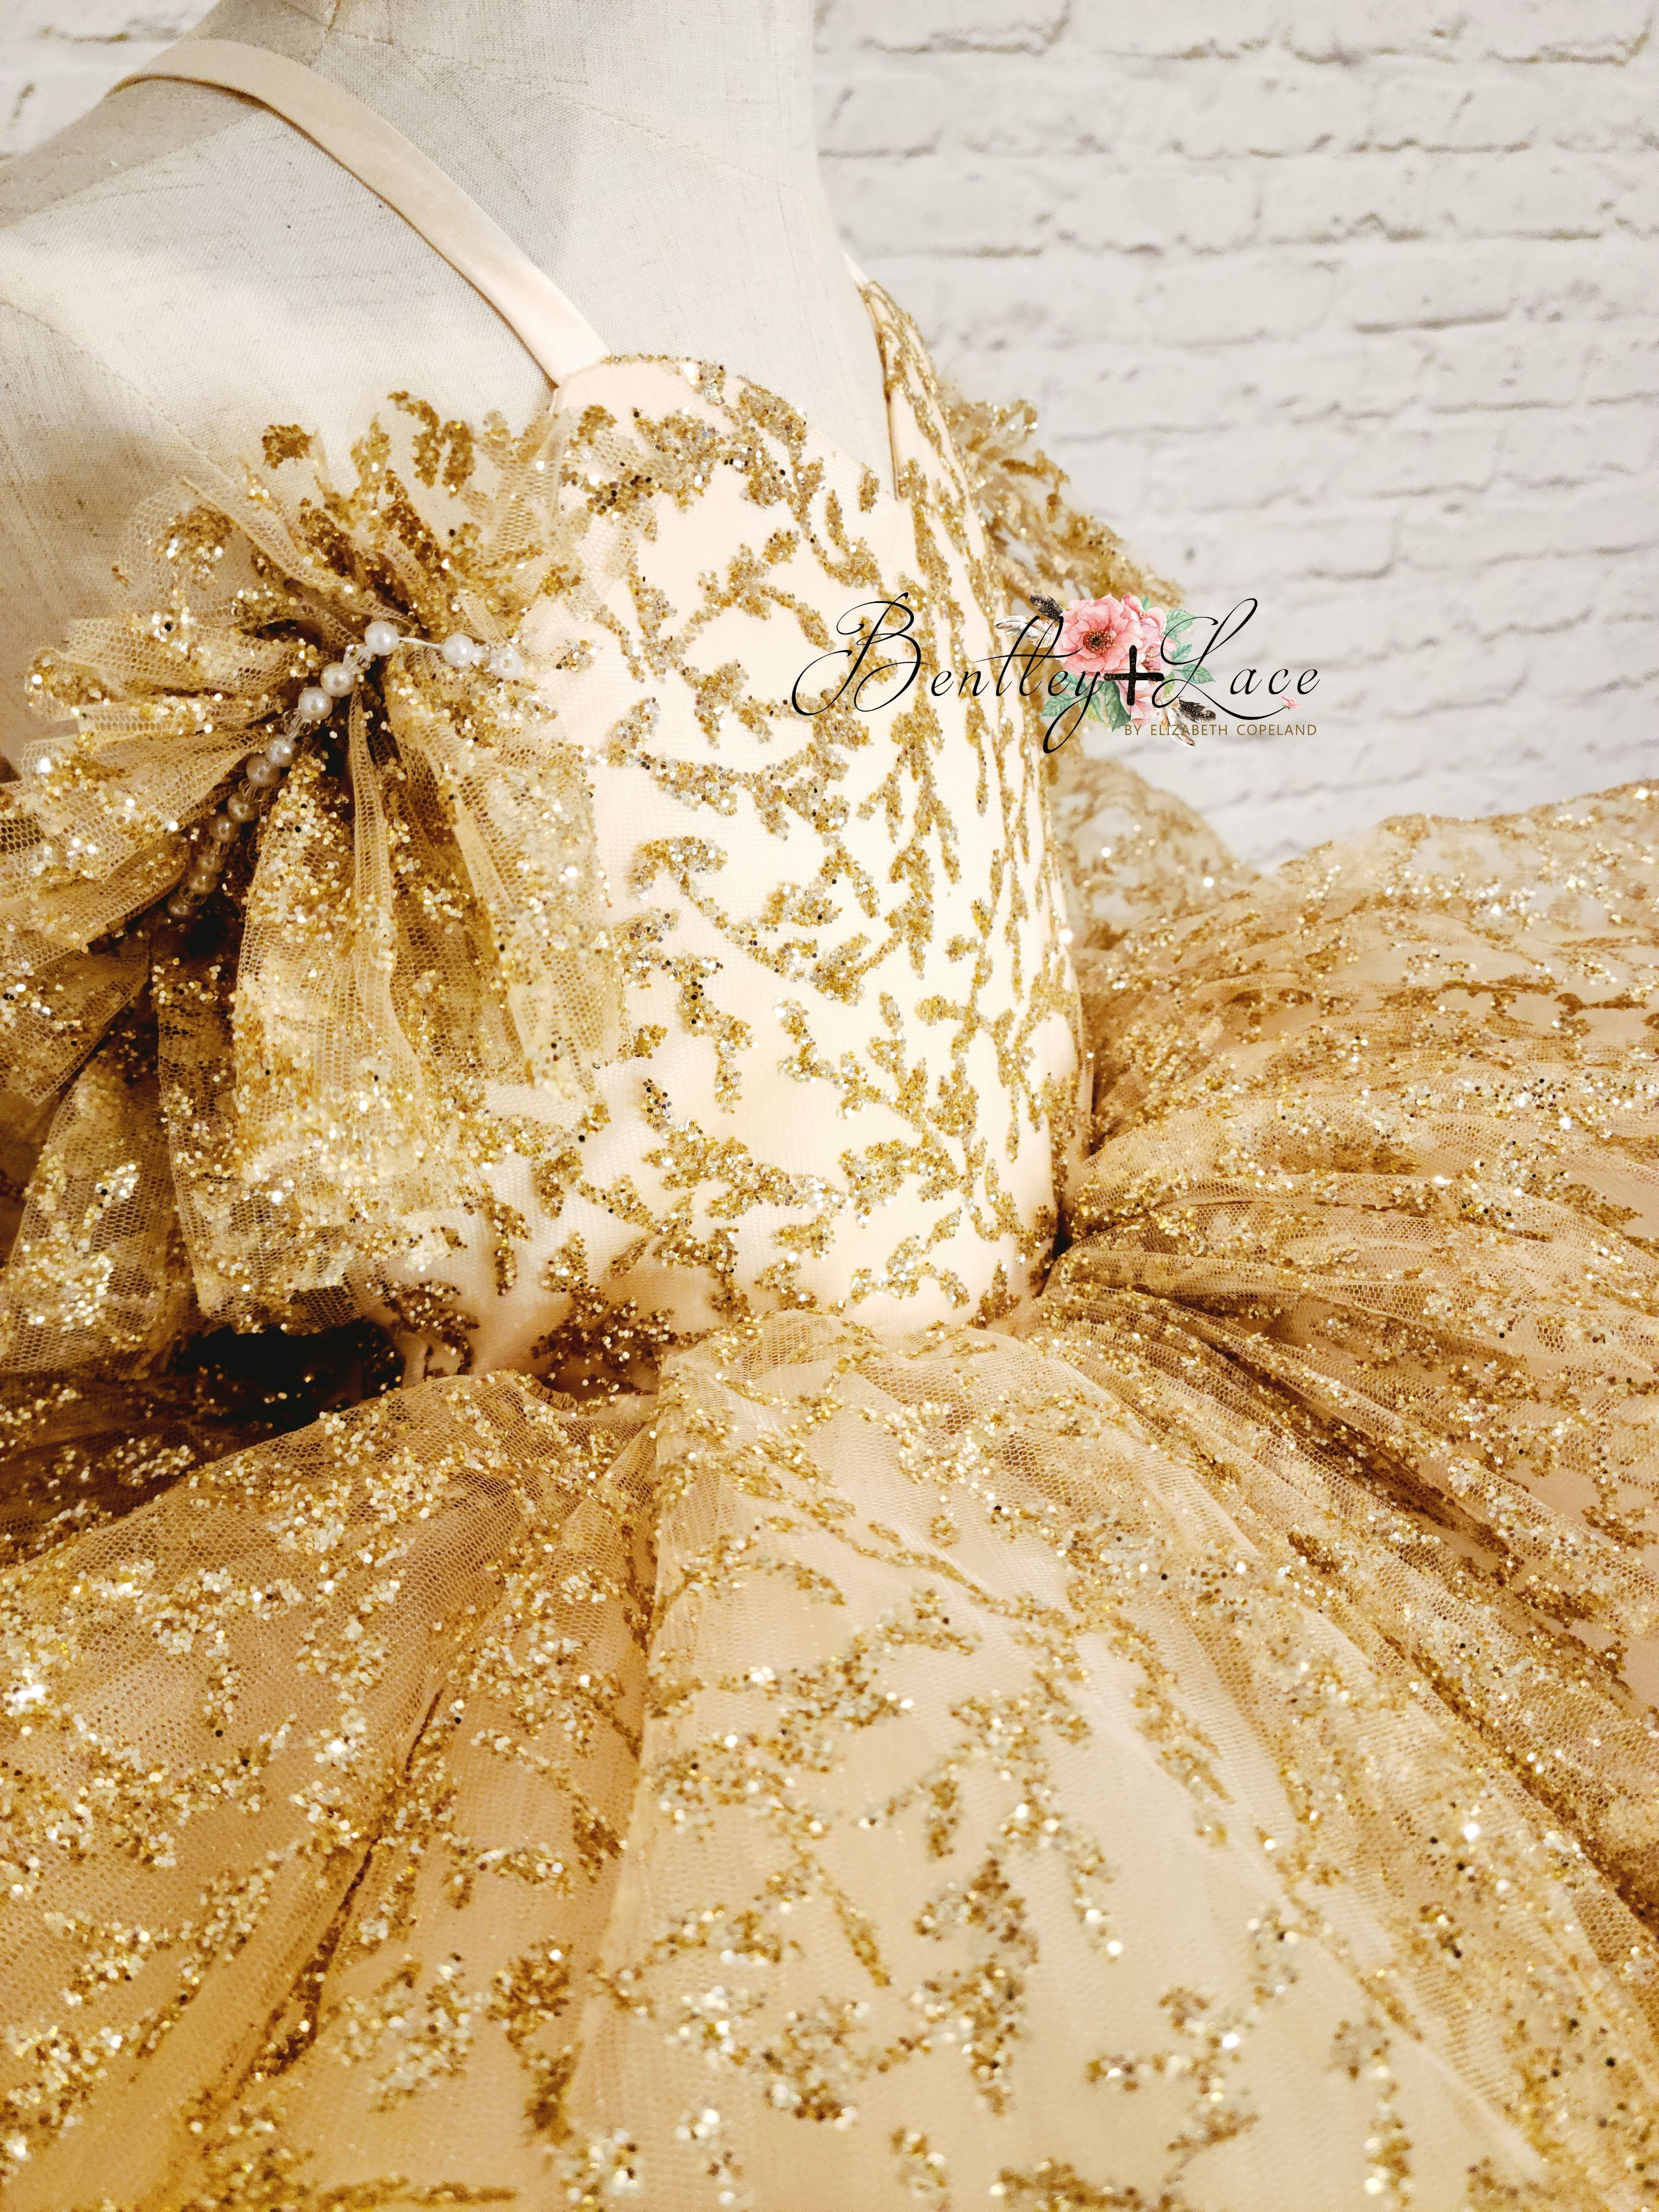 "Glimmering" Gold Leaf- Petal Length Dress  Editorial Dress, Couture Gown, Special Occasion Dress